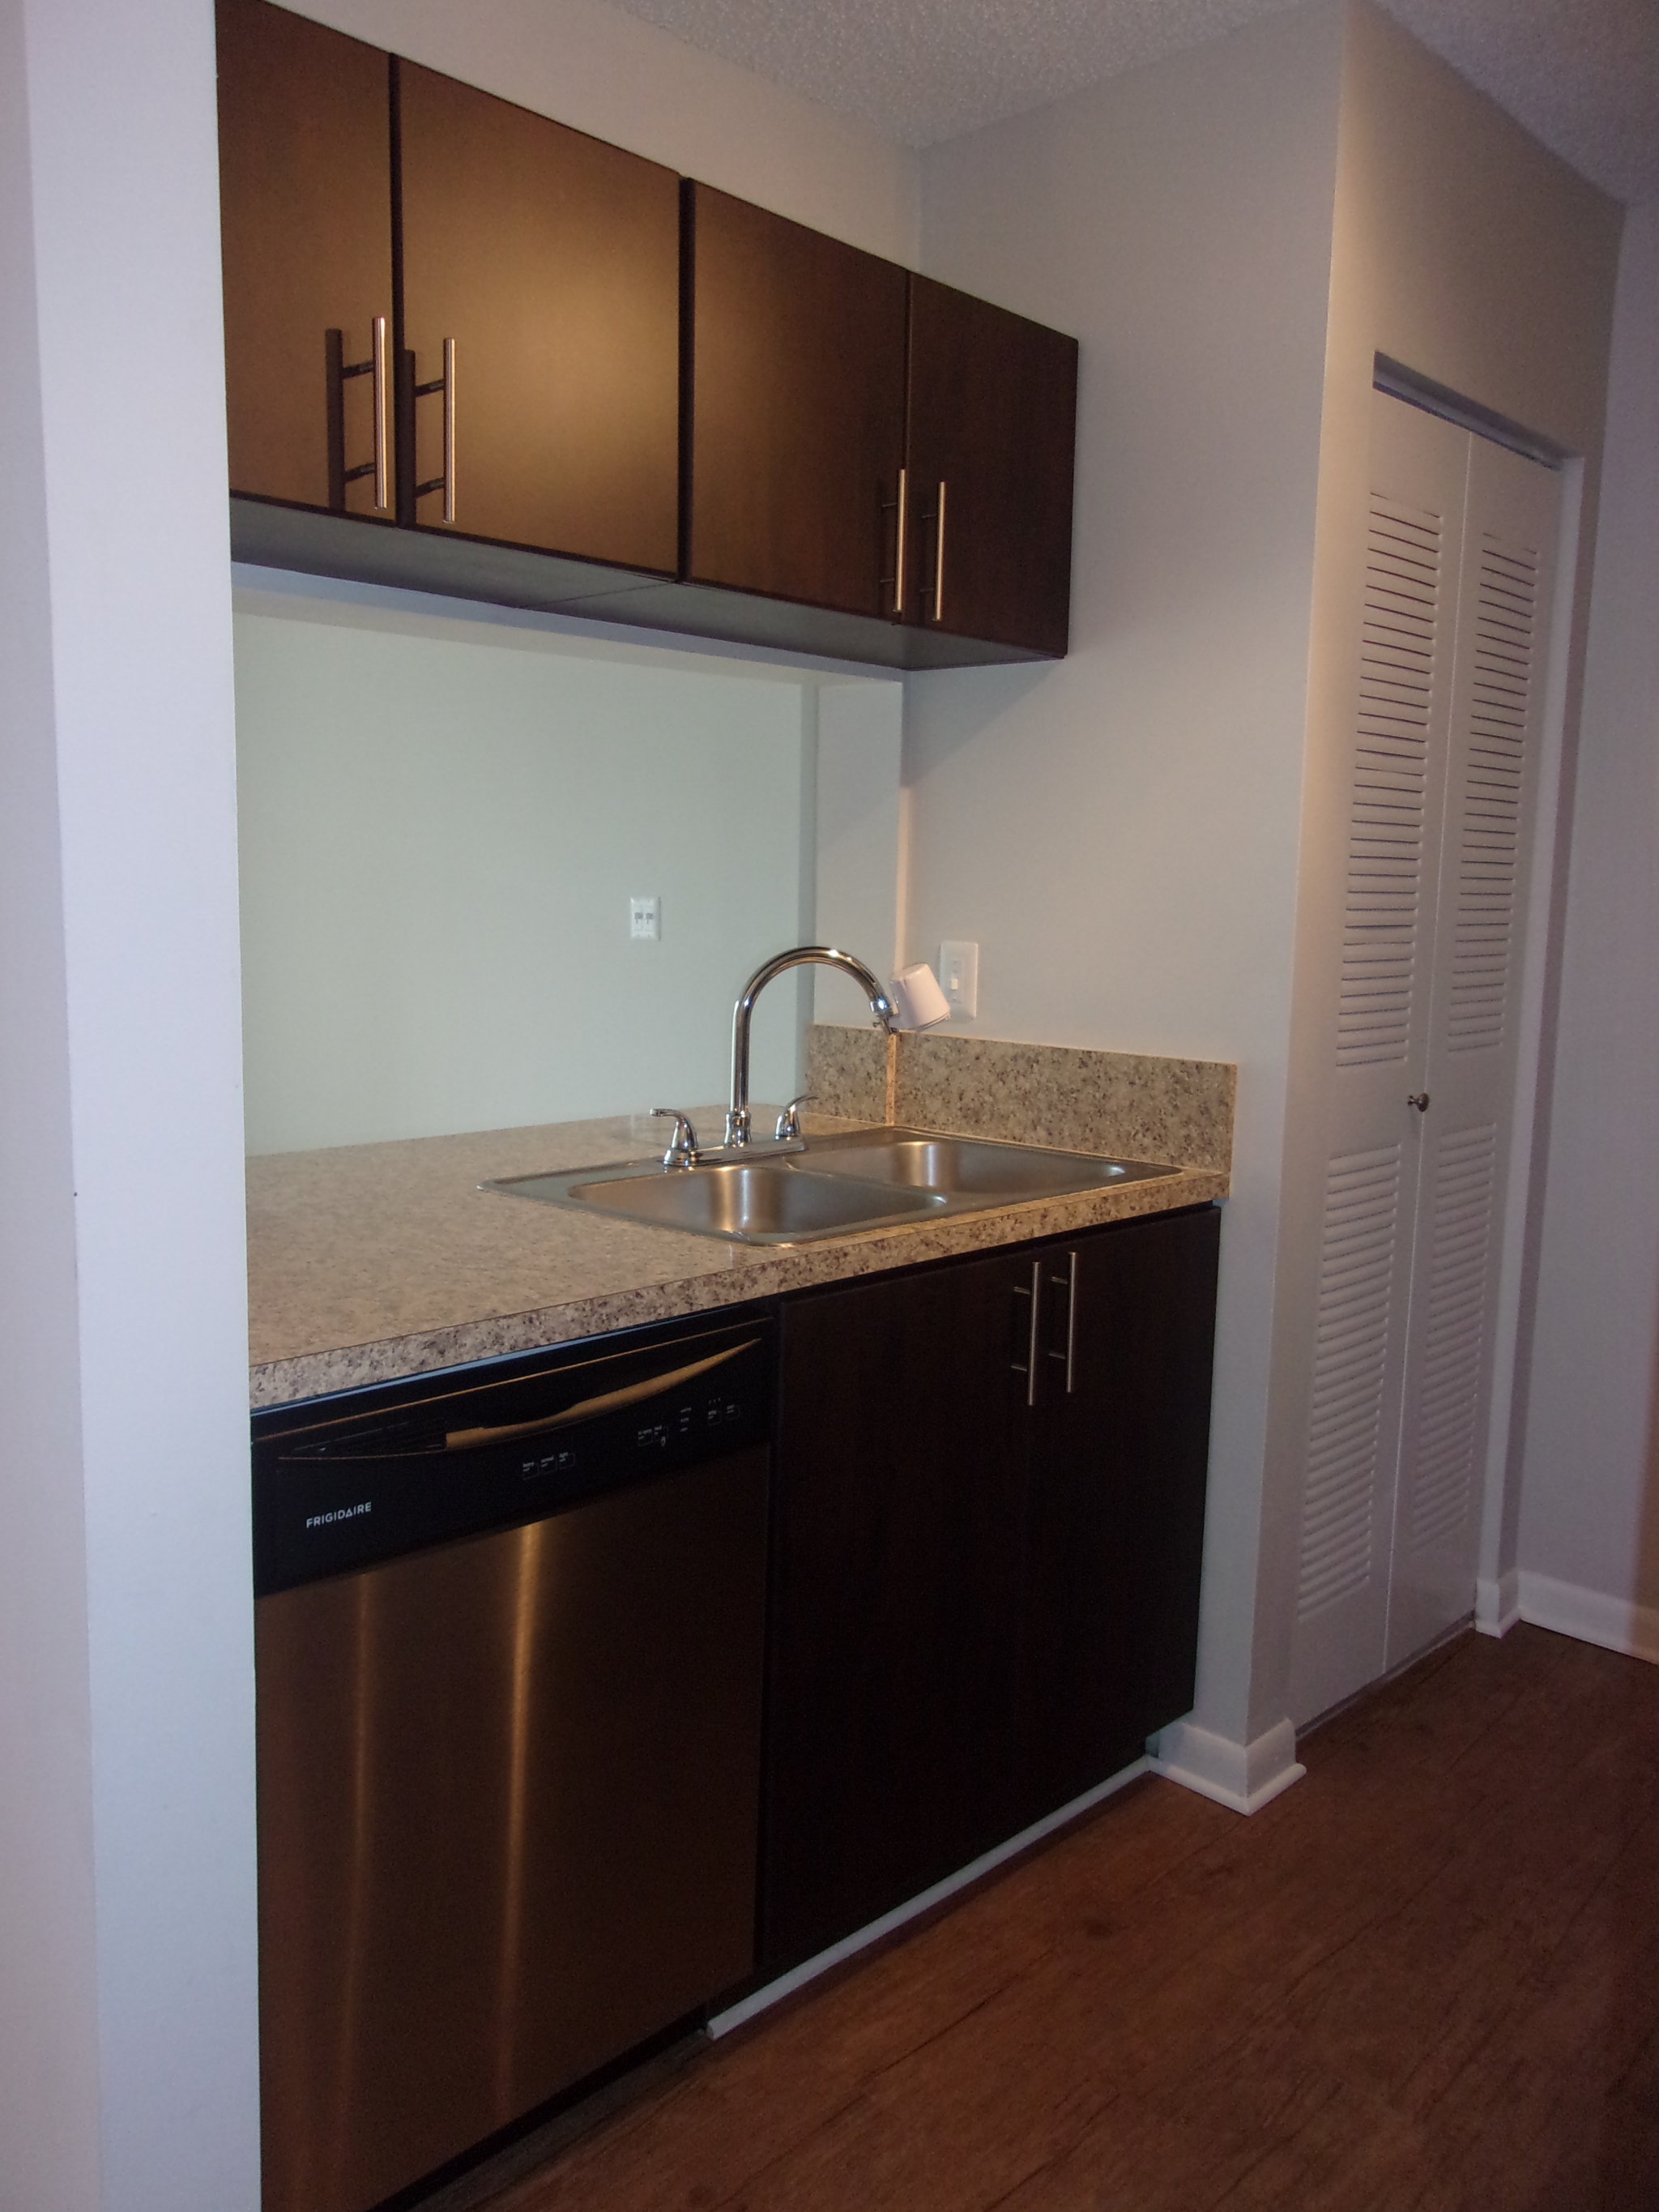 Compact kitchen counter with large stainless steel sink, overhead cabinets, and dishwasher next to double-door pantry